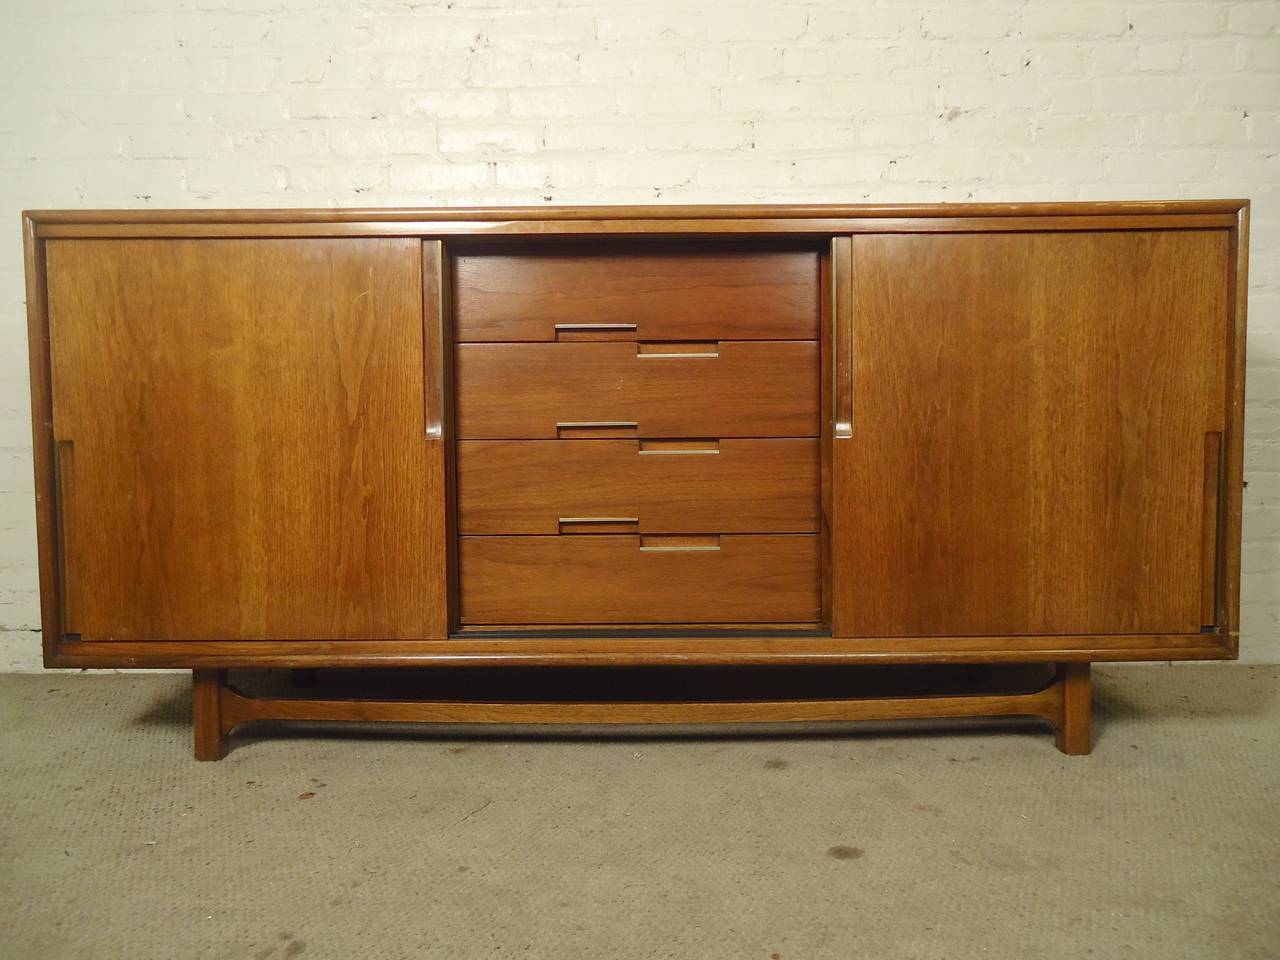 Unusual modern dresser with nine drawers and removable sliding doors. This piece can be a dresser, credenza or sideboard depending how you arrange the doors. Nice brass trim on the inset handles, sculpted stretcher, attractive walnut grain